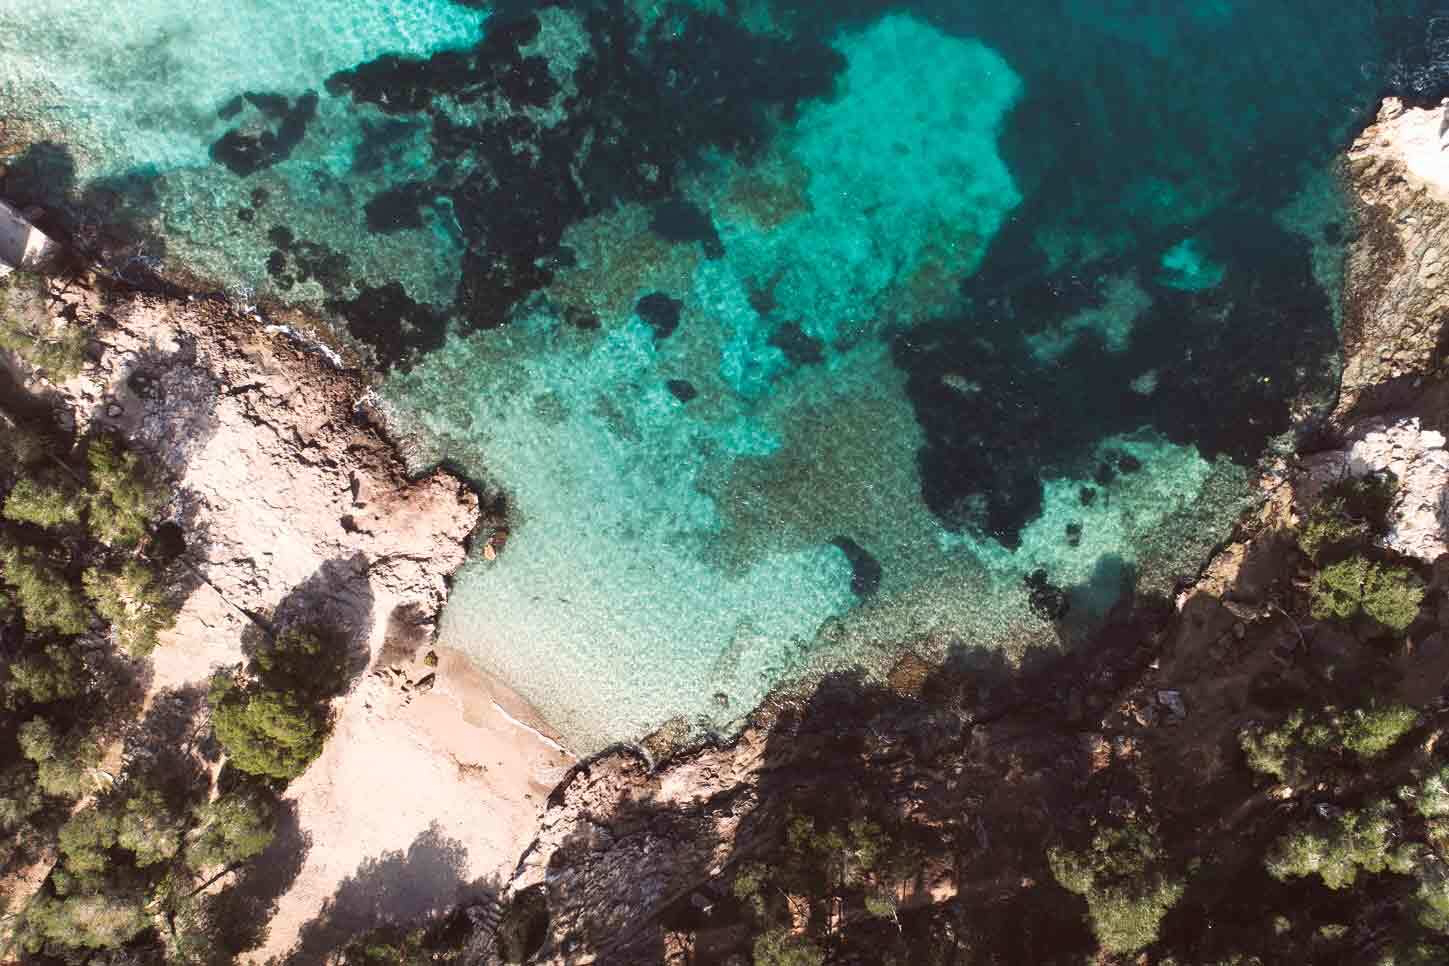 Cala Ferrera is one of the best beaches for snorkelling in Mallorca